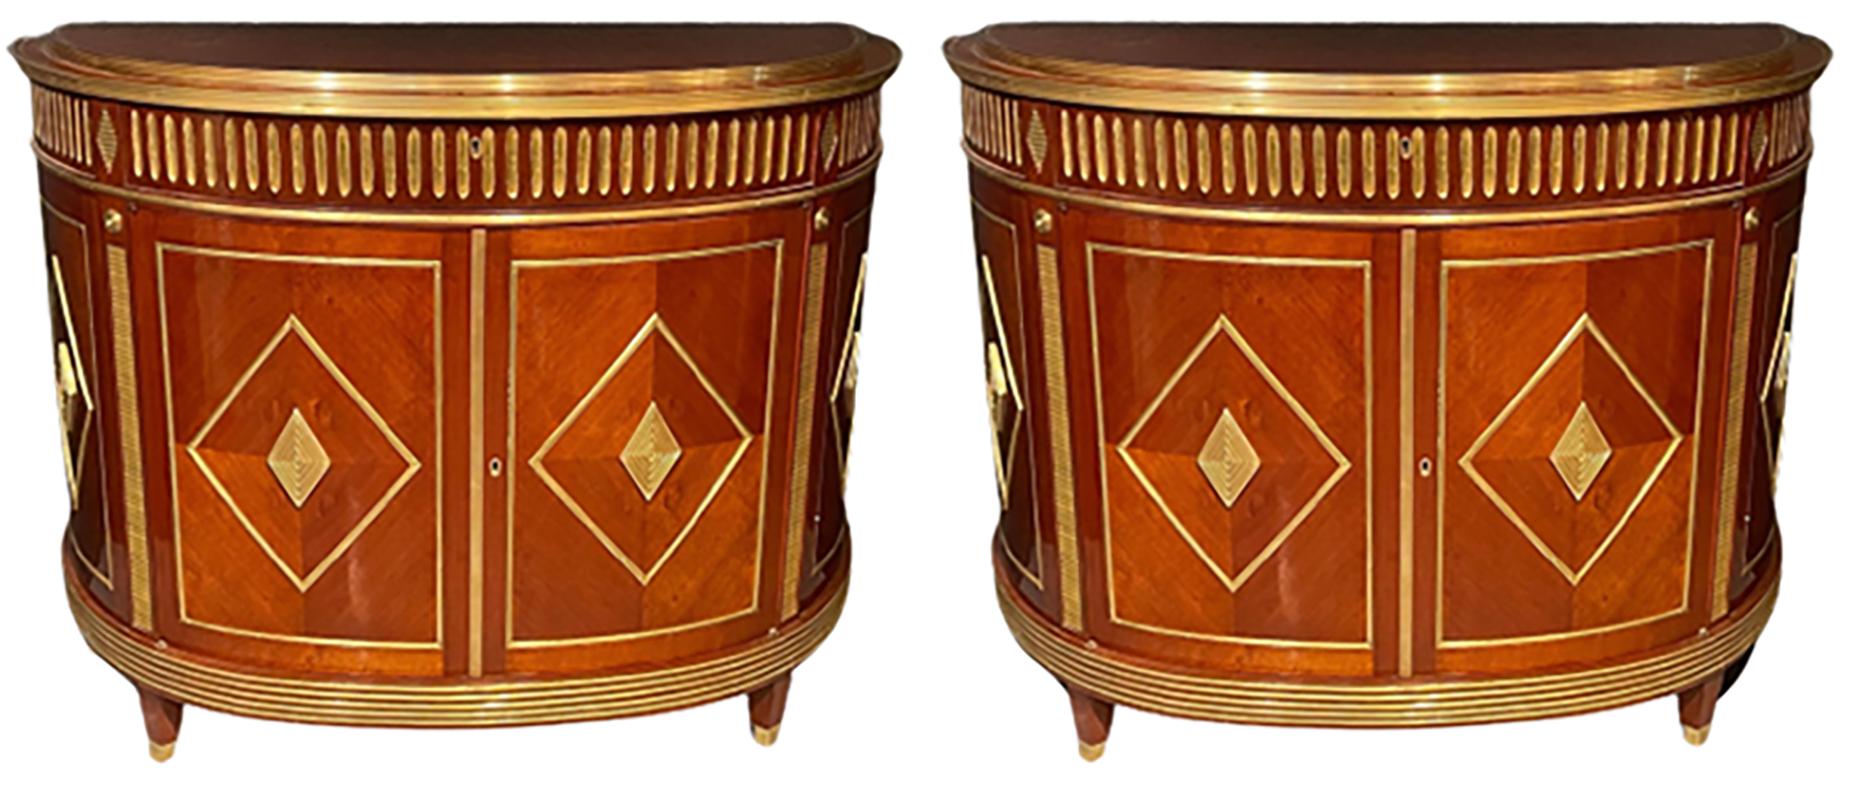 Russian neoclassical style pair of bronze mounted finely polished d shaped commodes, servers or bedside stands. Leaving nothing to the imagination these fully refinished chests are simply stunning. Each with open shelved interiors under a single